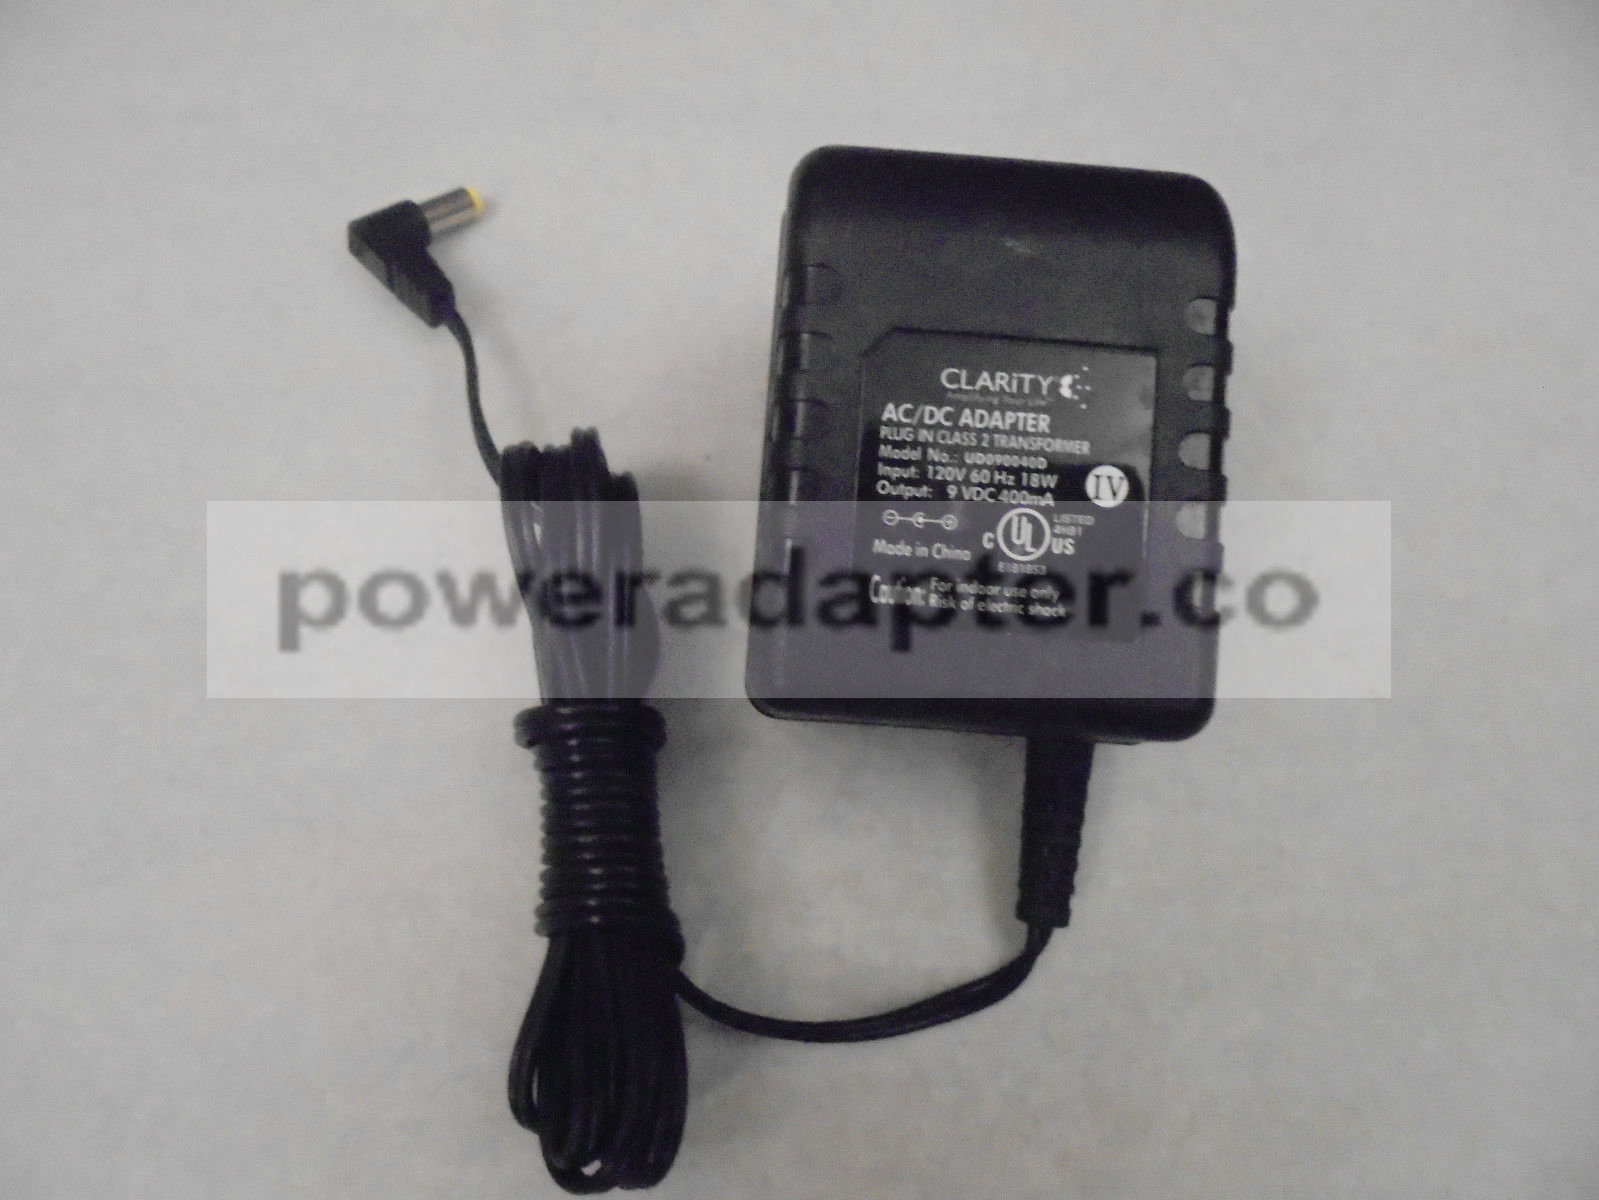 Clarity UD090040D 9 vdc 400mA POWER SUPPLY AC DC ADAPTER ORIGINAL Condition: Used: An item that has been used previou - Click Image to Close